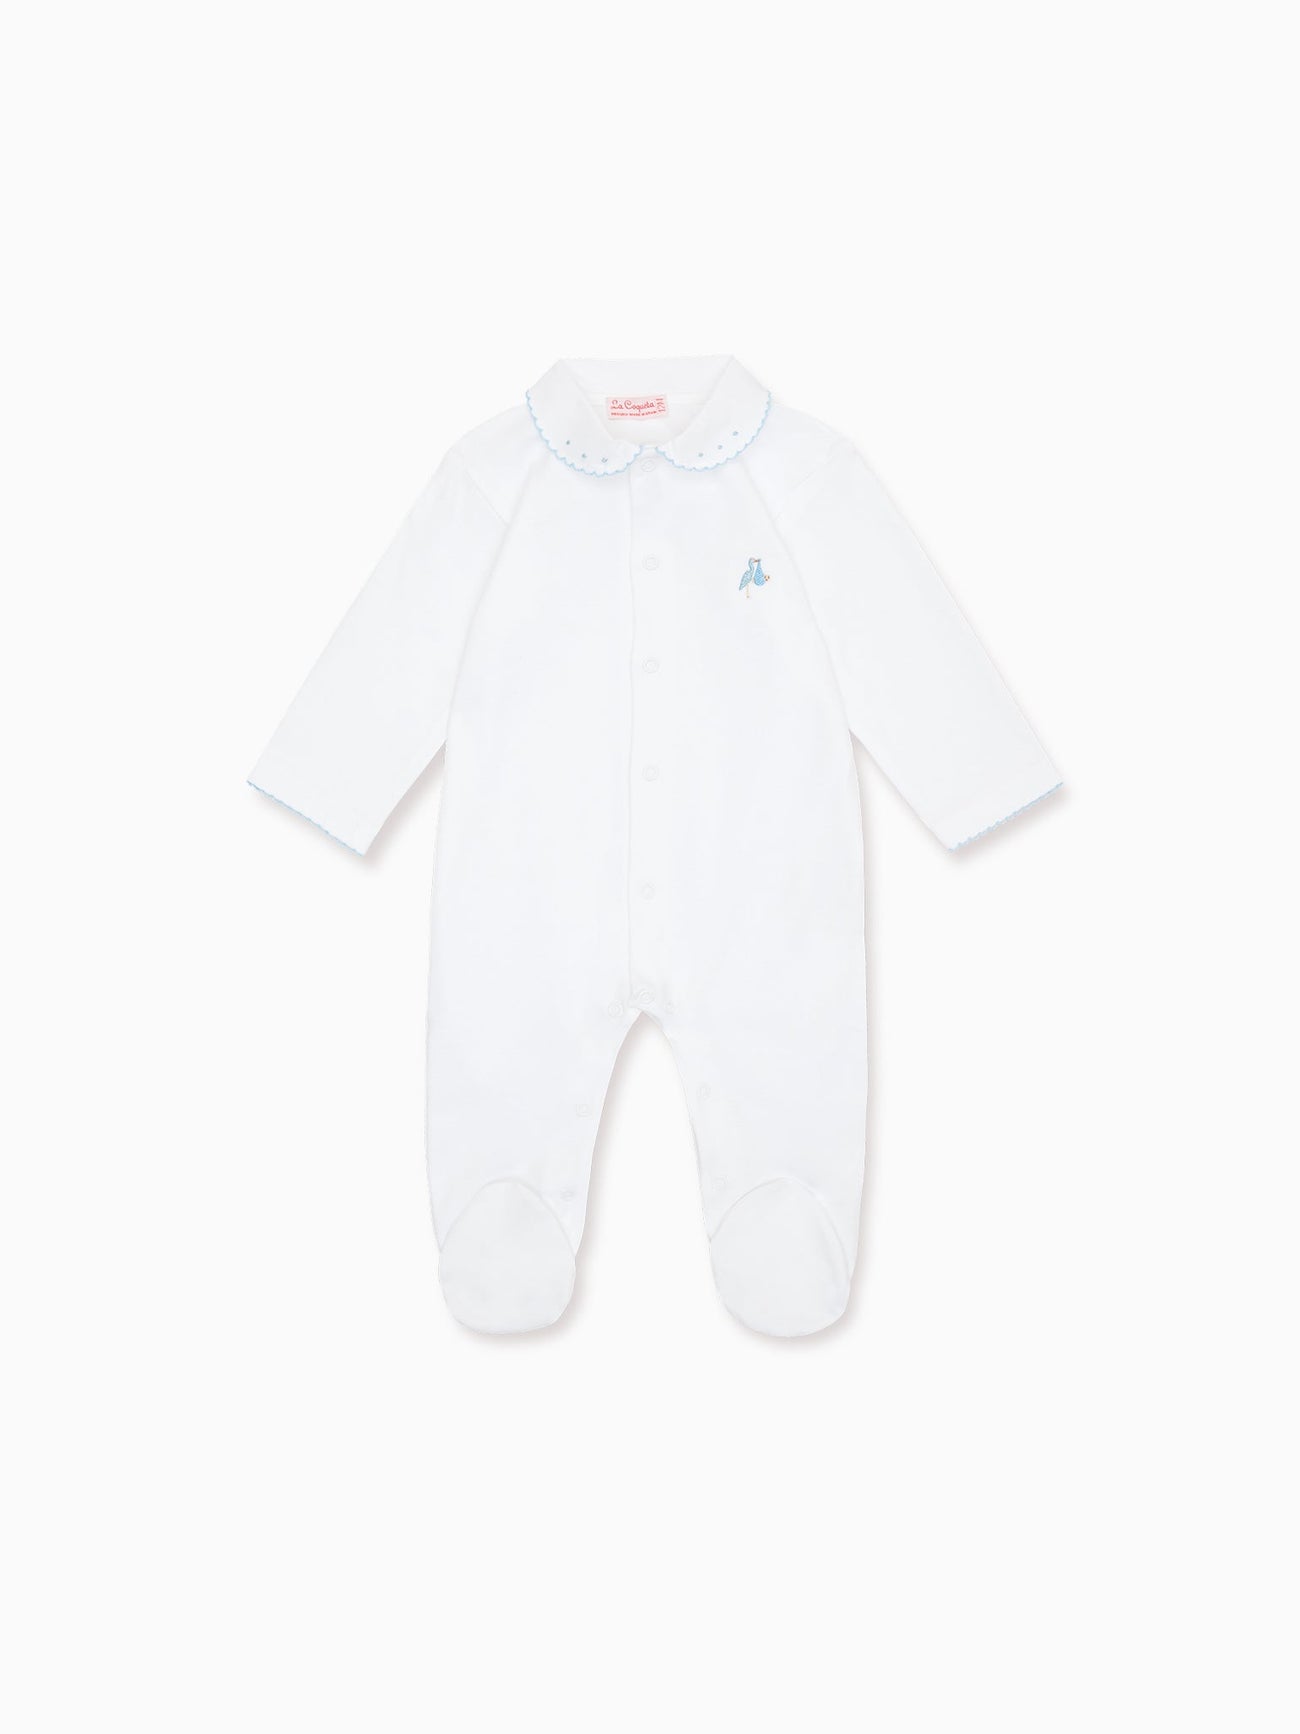 White Stork Embroidered Jersey Baby Sleepsuit